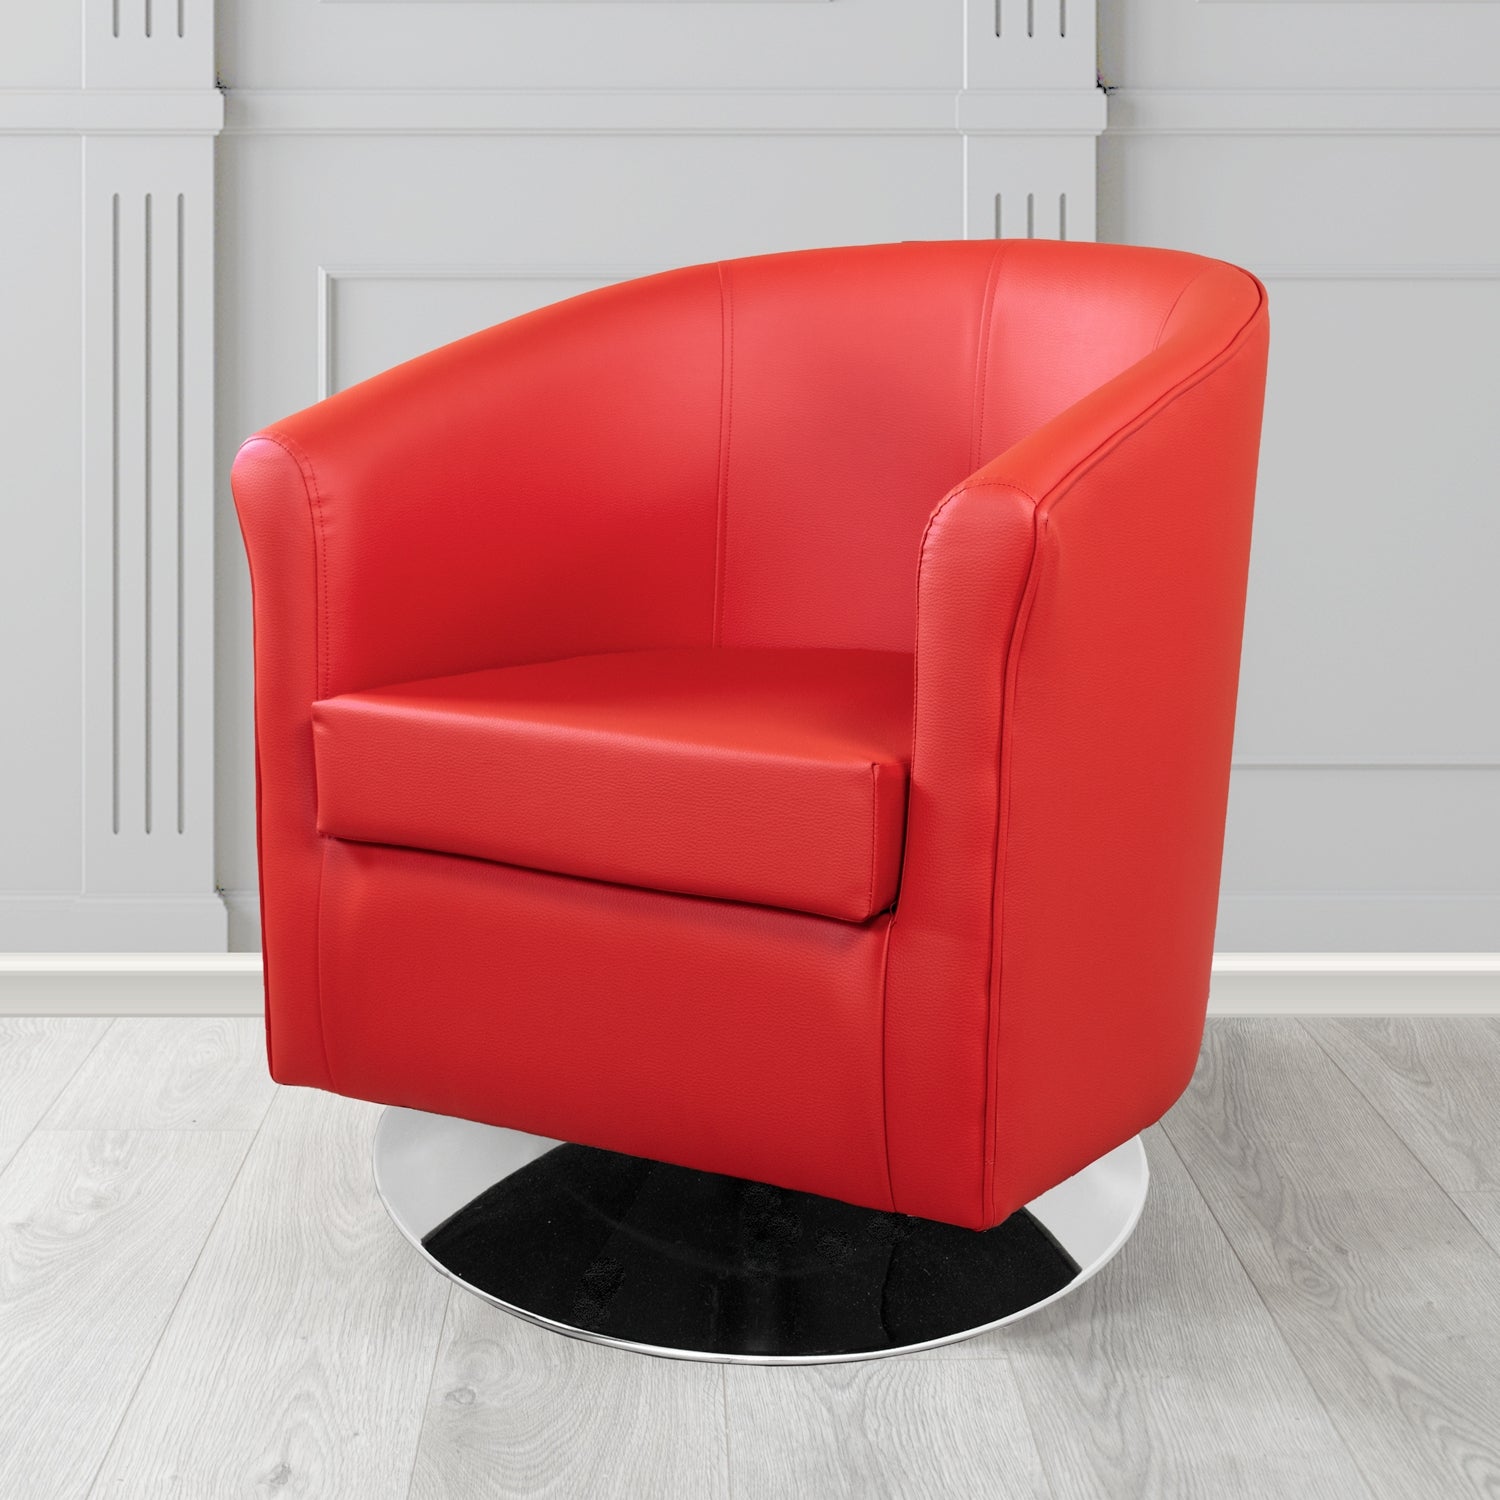 Tuscany Swivel Tub Chair in Madrid Rouge Faux Leather - The Tub Chair Shop